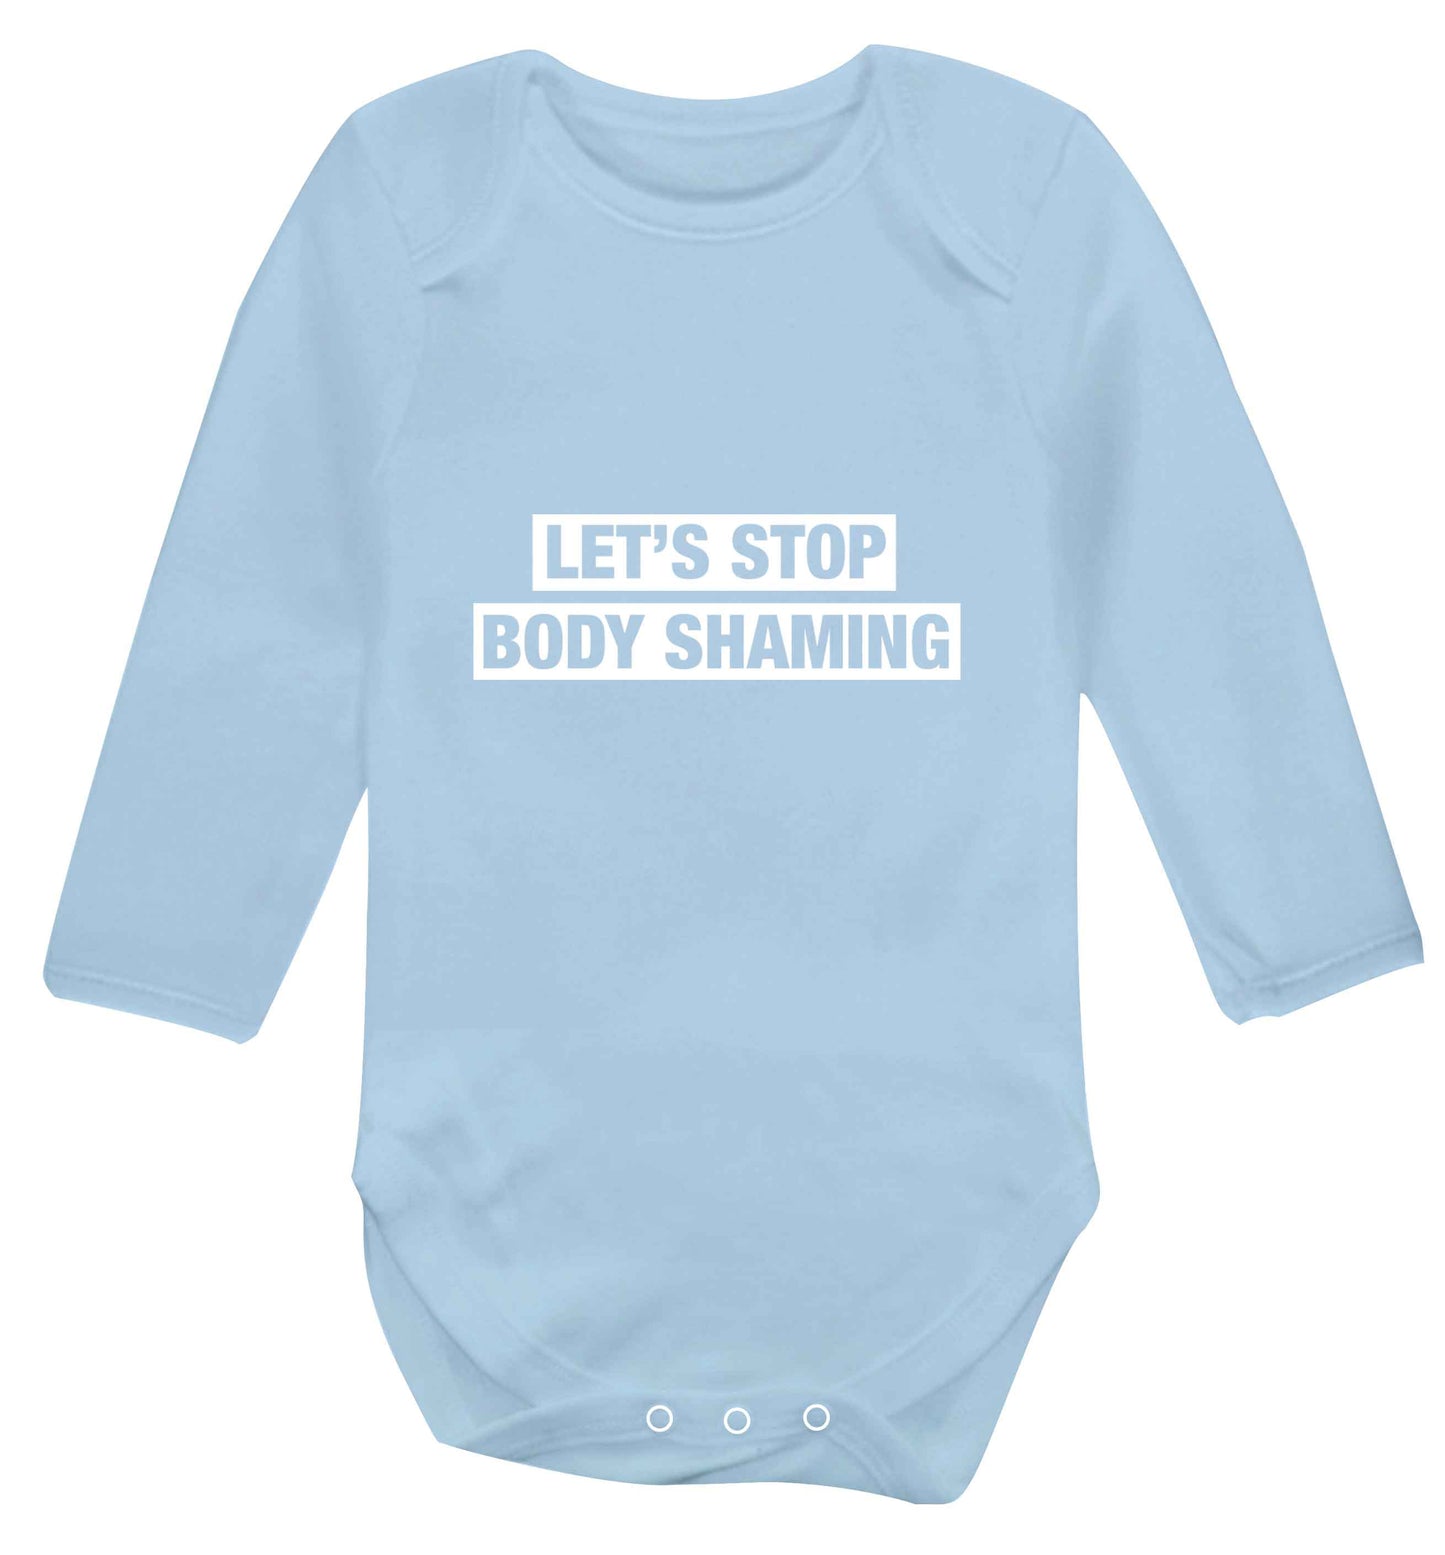 Let's stop body shaming baby vest long sleeved pale blue 6-12 months